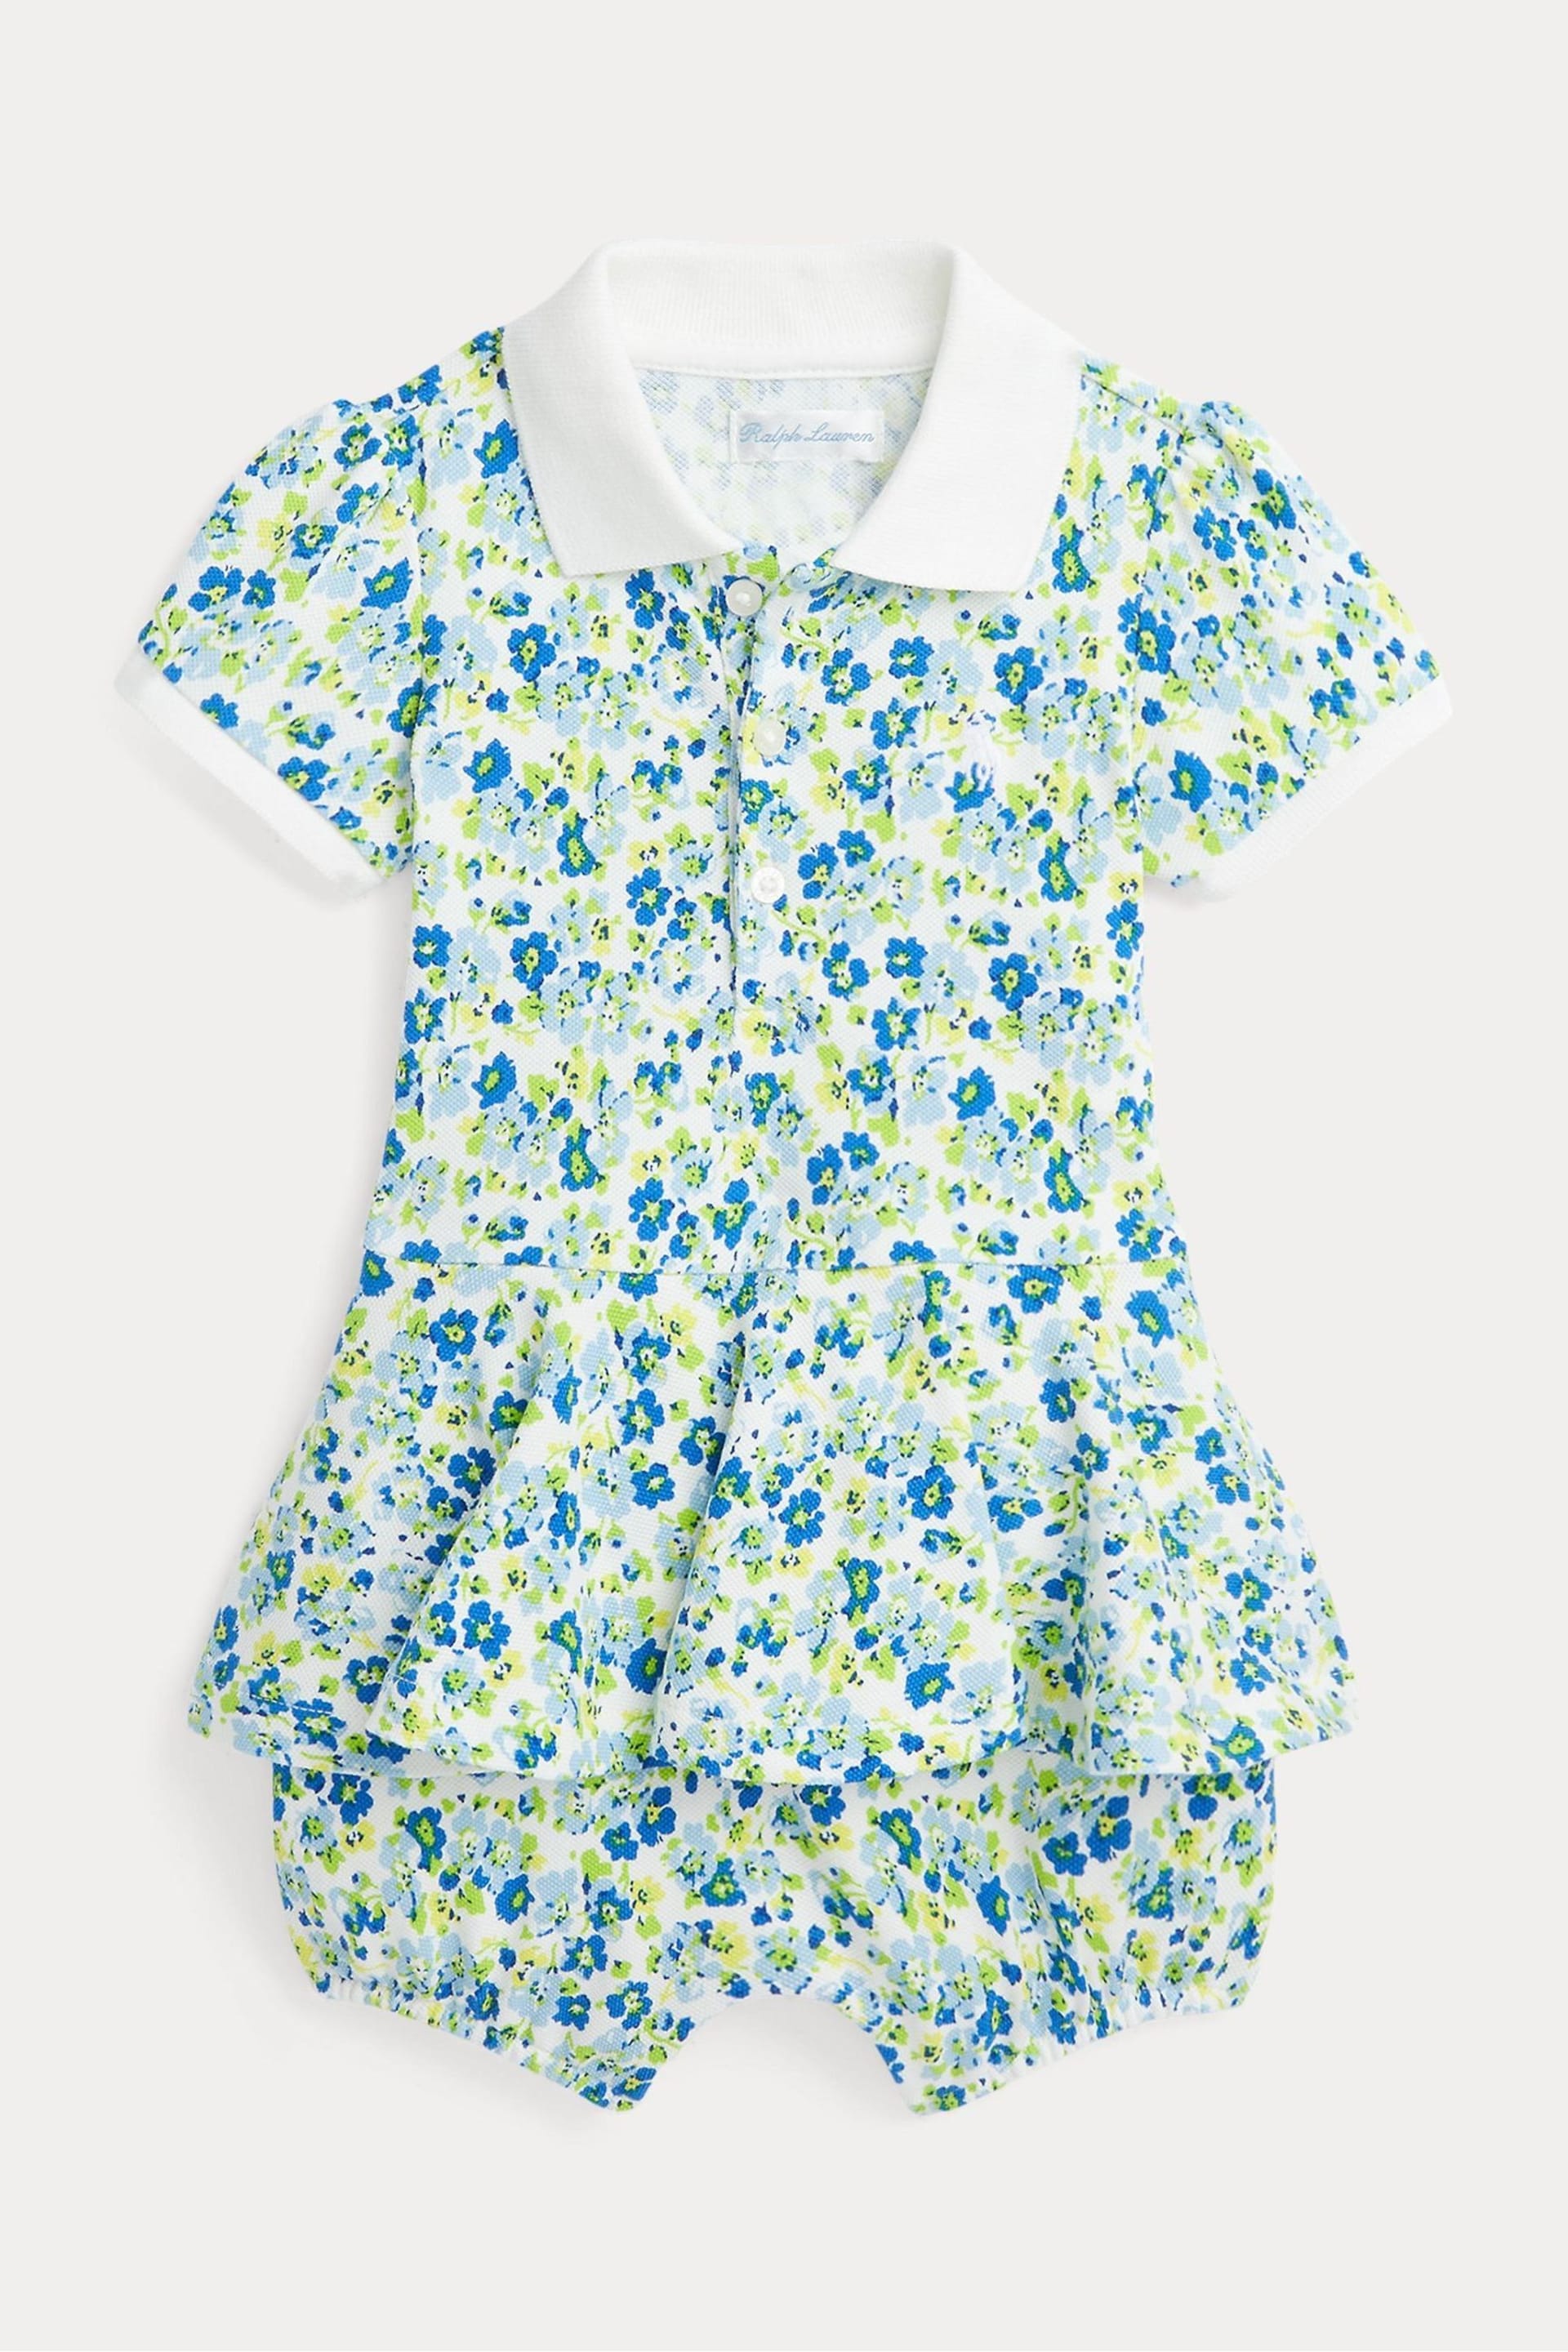 Polo Ralph Lauren Baby Floral Romper - Image 1 of 4